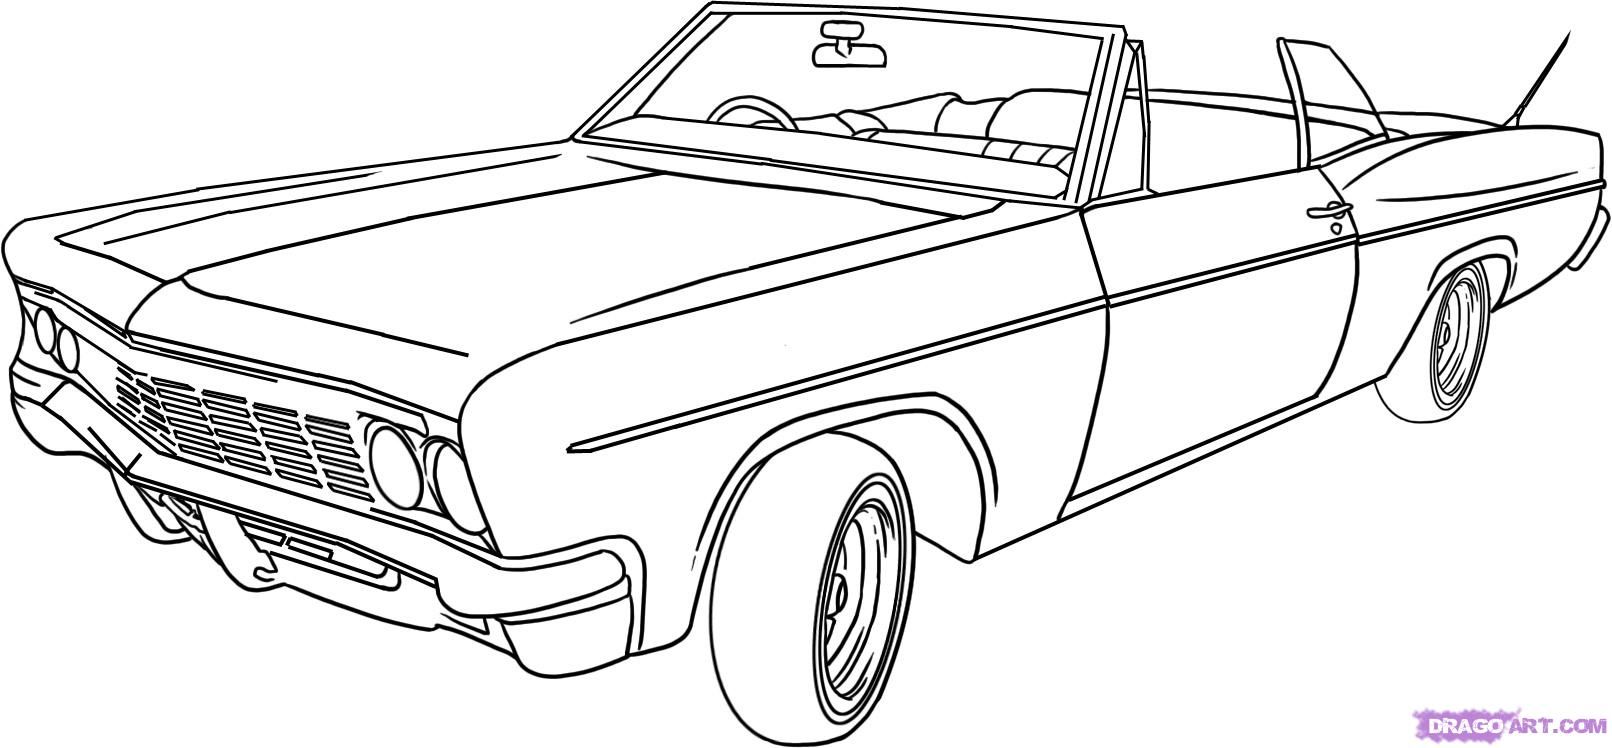 11 Pics Lowrider Car Coloring Pages Art Drawings